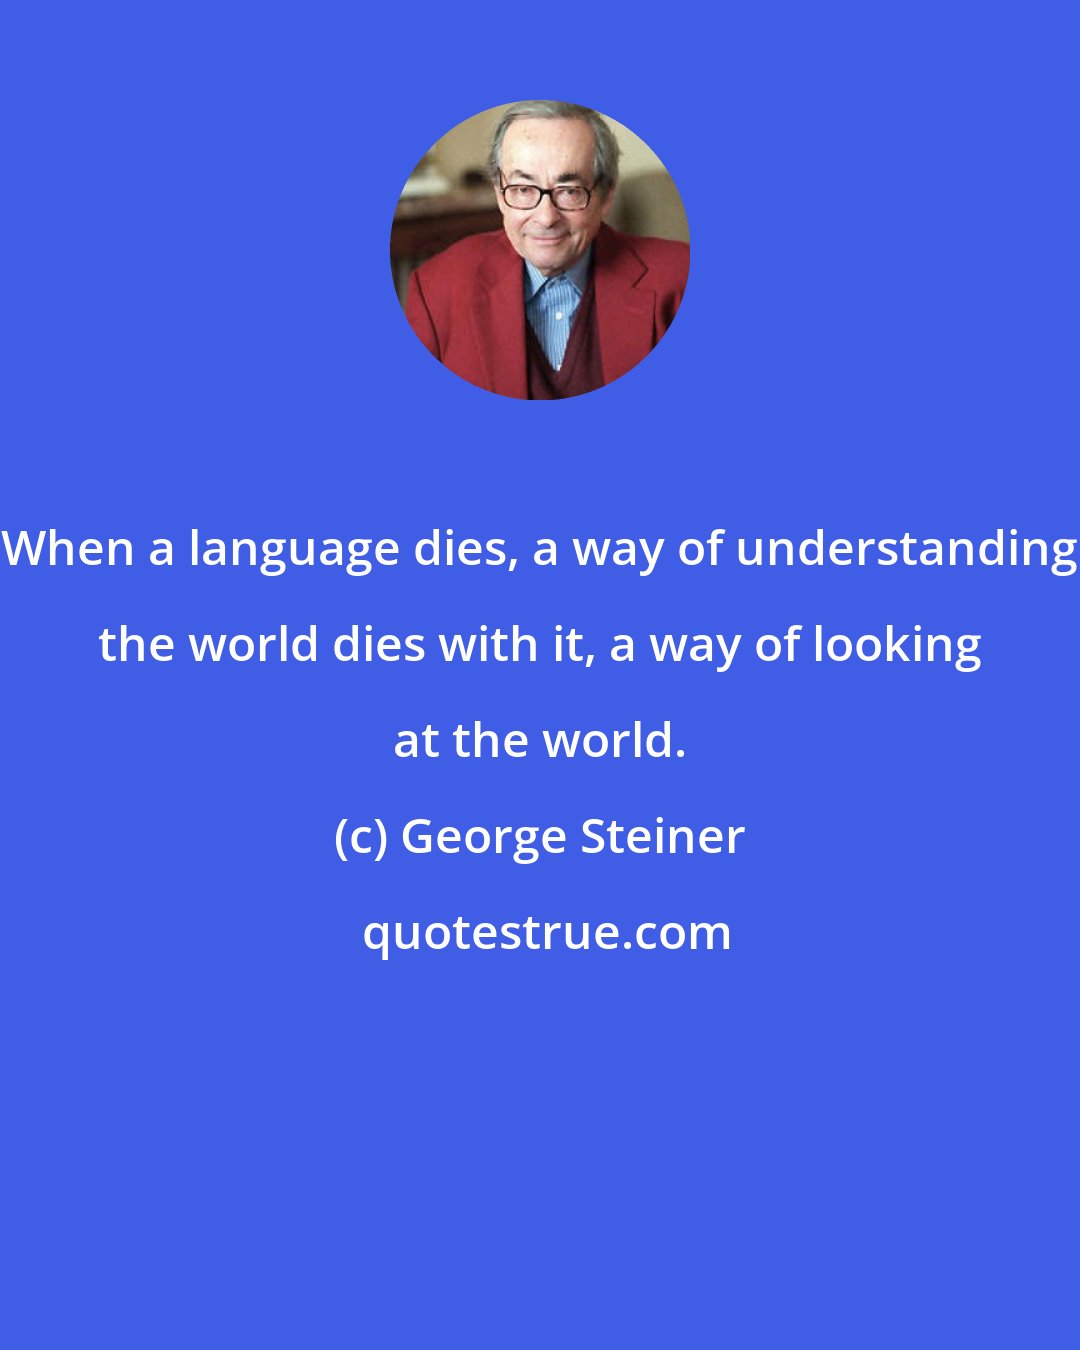 George Steiner: When a language dies, a way of understanding the world dies with it, a way of looking at the world.